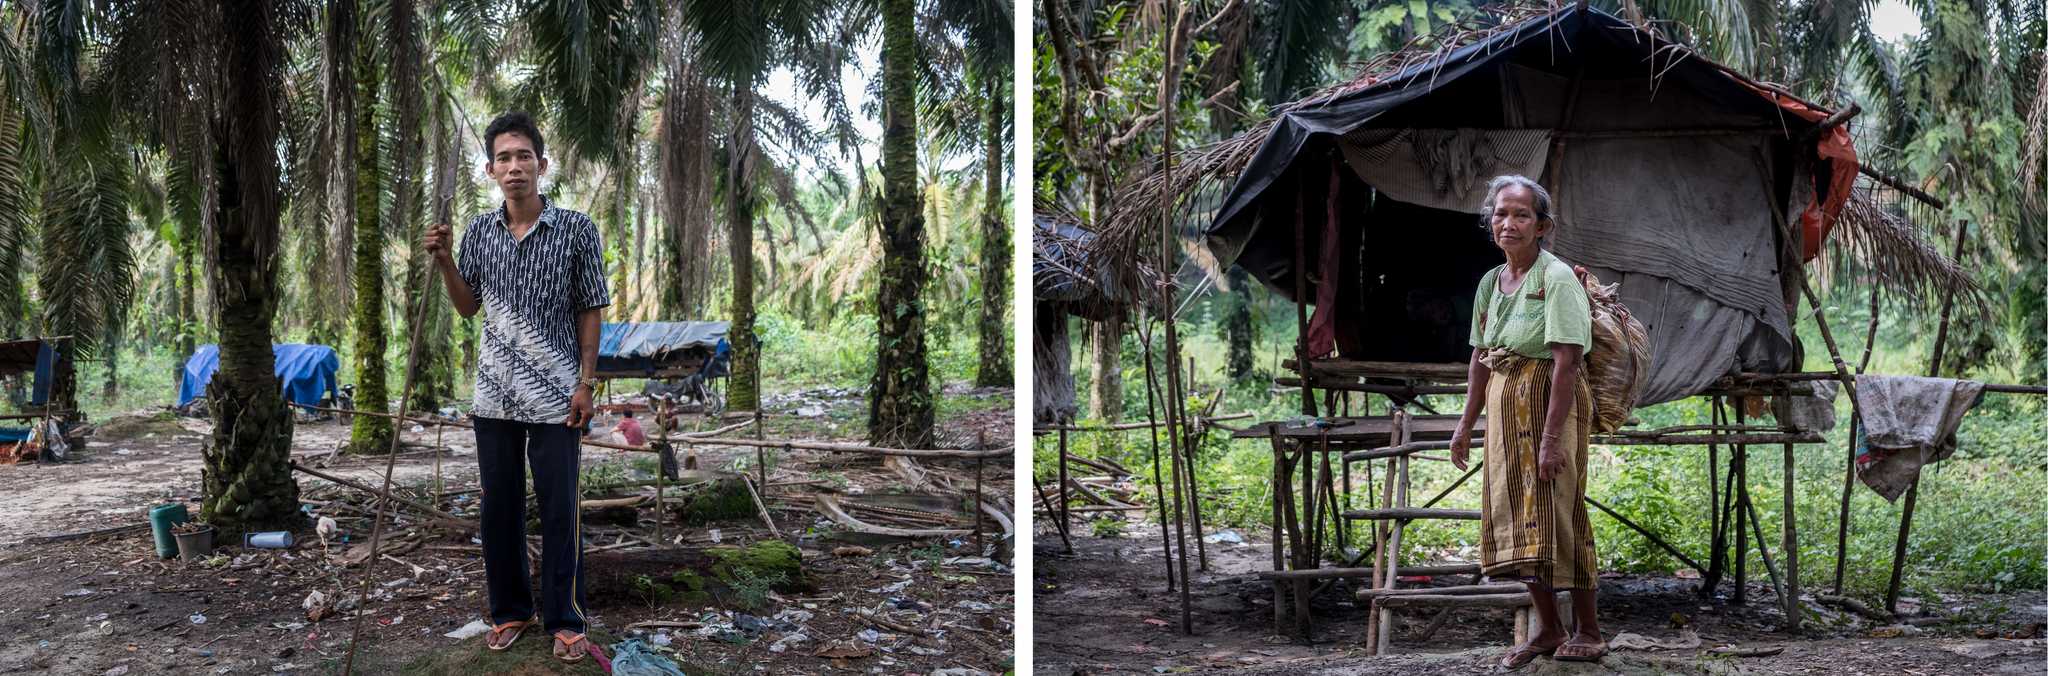 Mat Yadi (left) now lives with his family in a plantation after his tribe’s land was ceded to a plantation company. Siti (right) earns money by collecting oil palm fruitlets that fall to the ground as larger bunches are harvested.